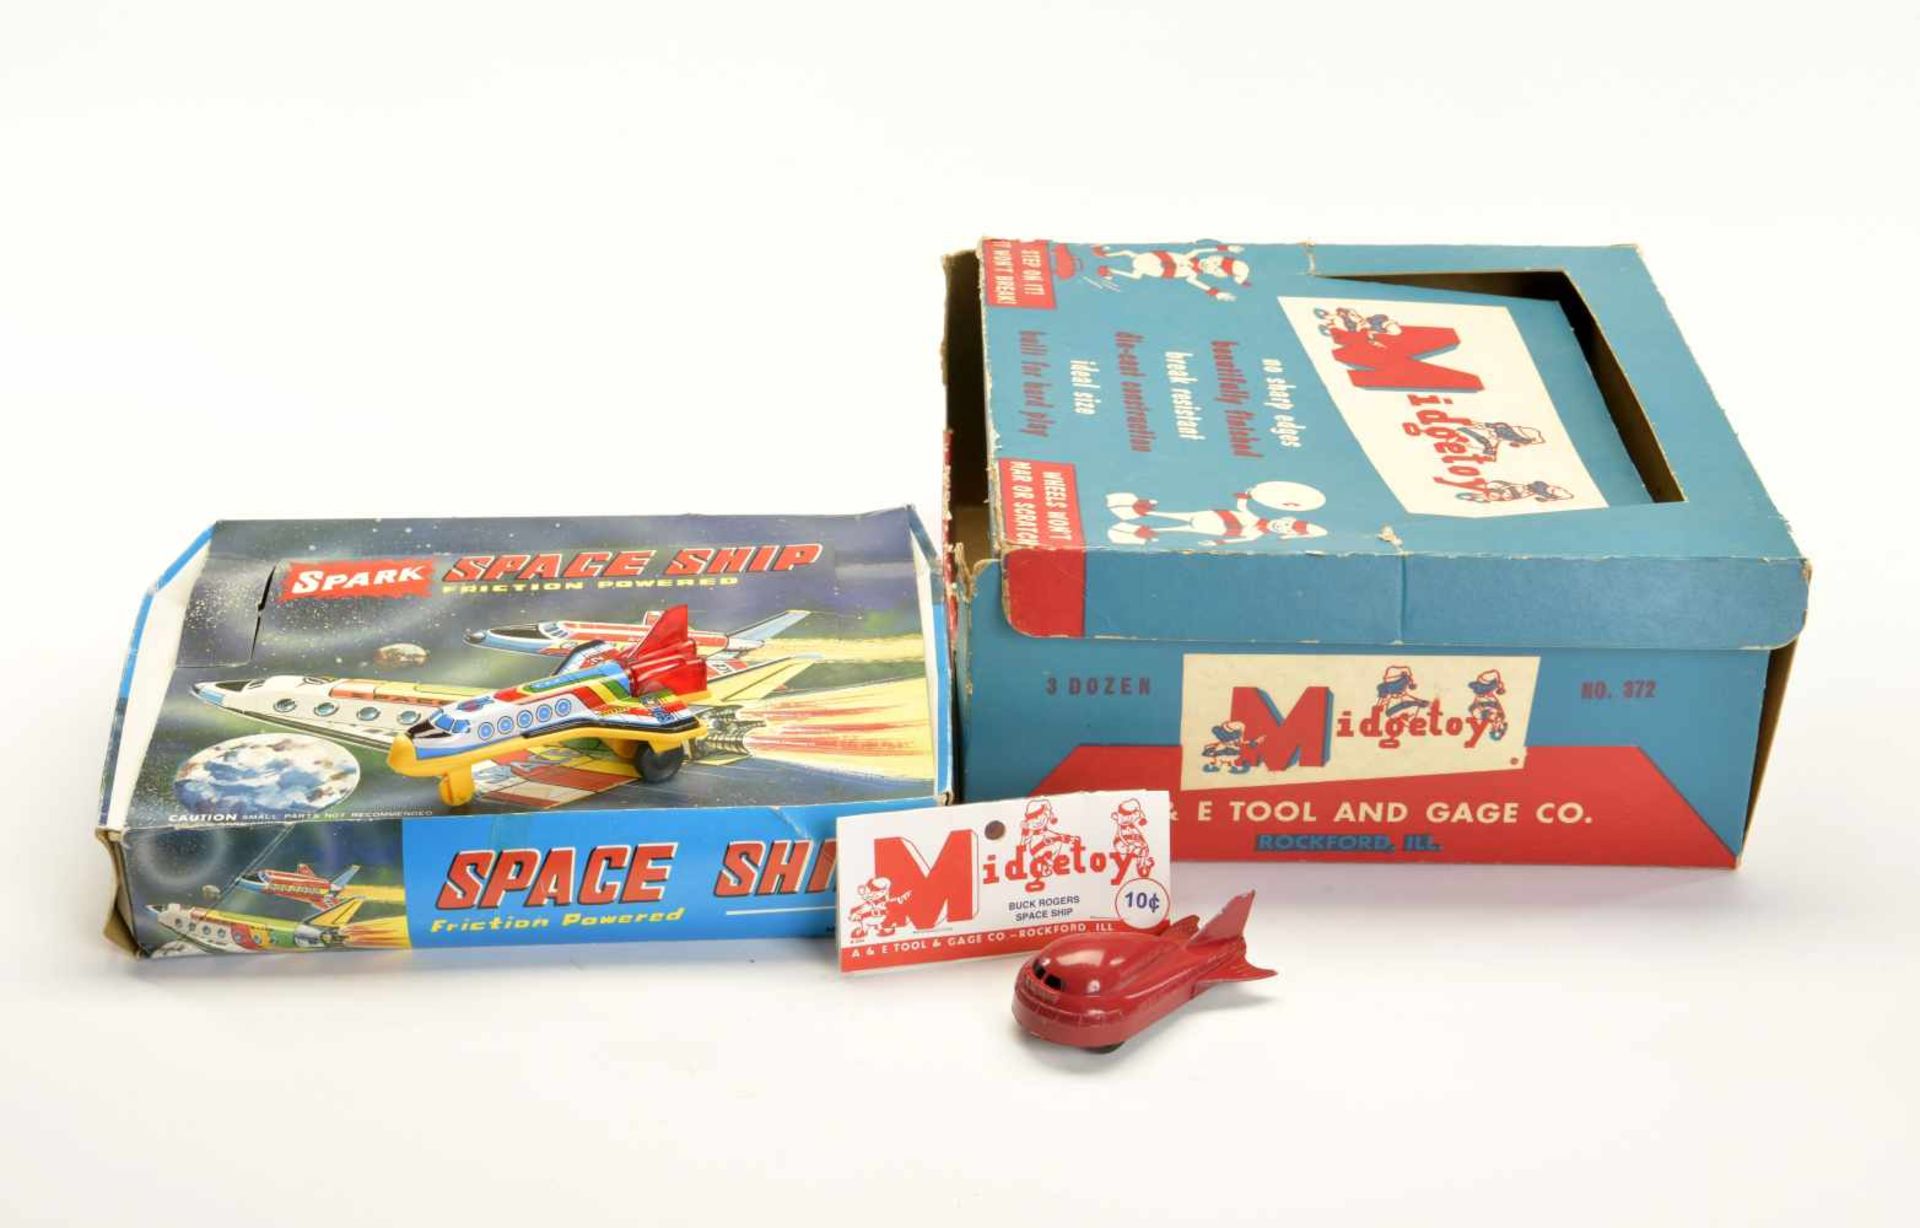 2x Trader's Box: Space Ship + Midgettoy Buck Rogers Space Ship, Japan + USA, every box with 1 model, - Bild 2 aus 3